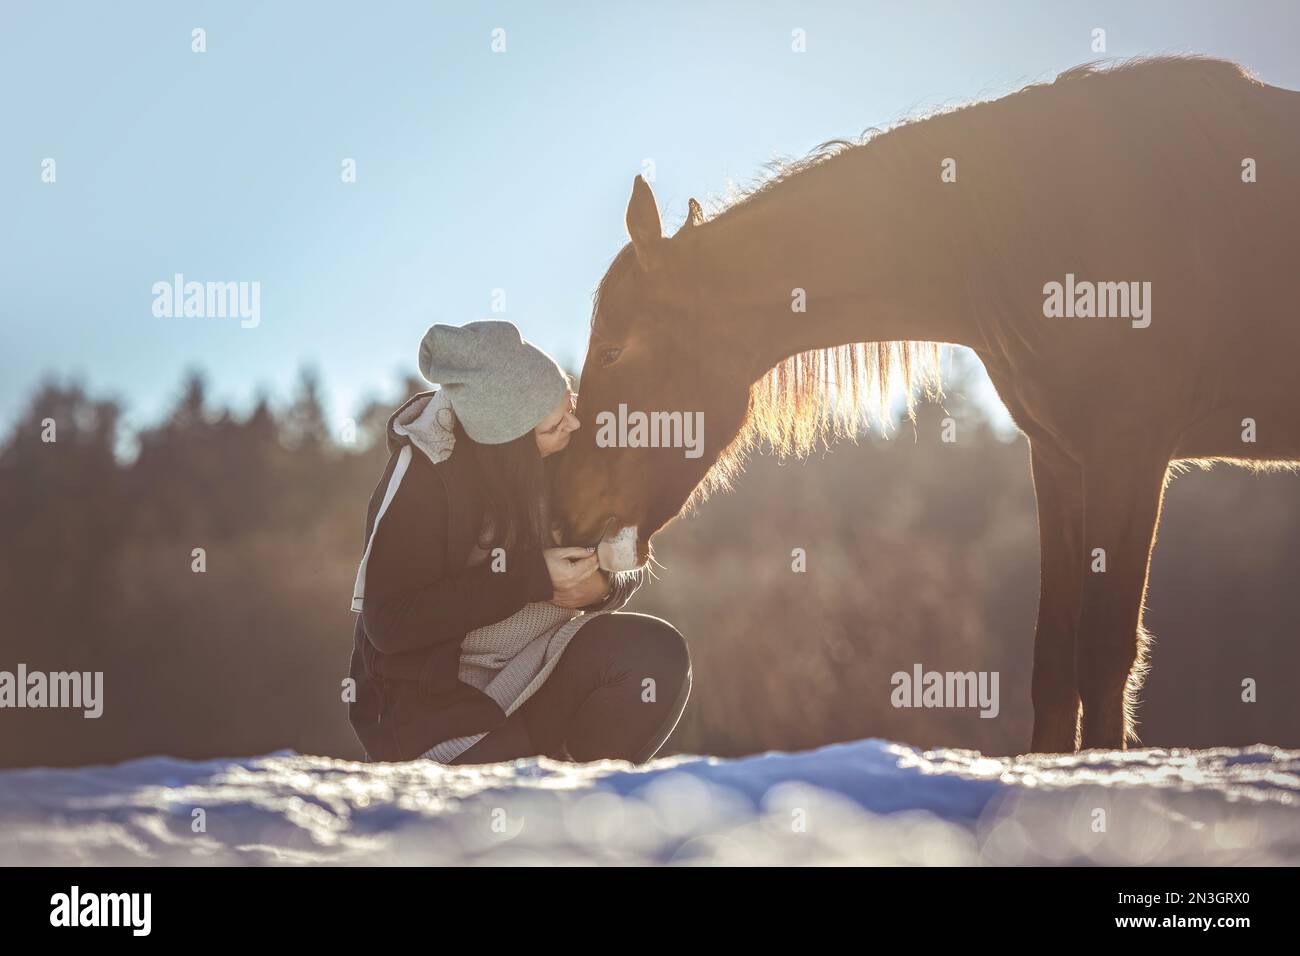 Portrait of an equestrian woman riding on her horse in front of a rural snowy winter landscape during sundown outdoors Stock Photo